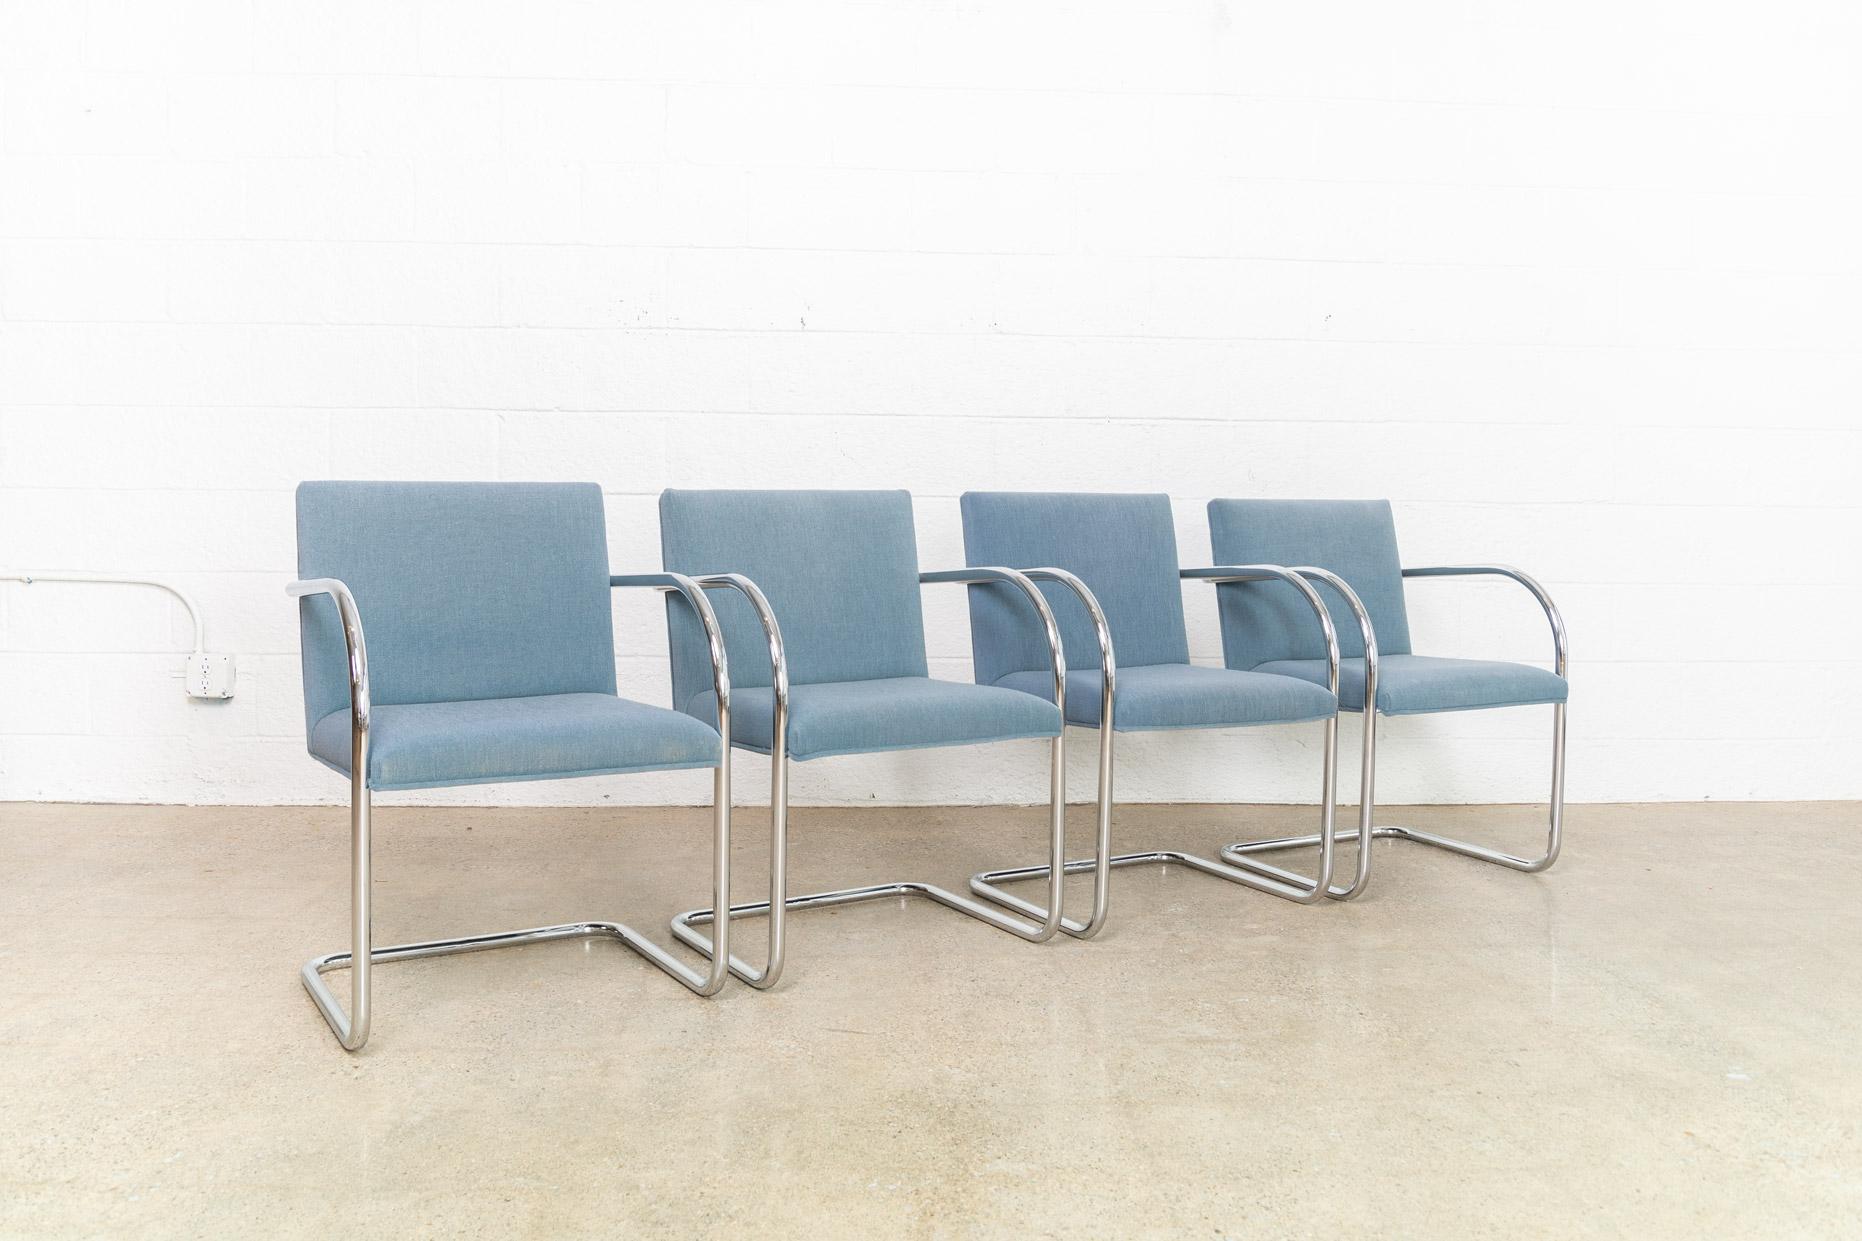 This set of four Mies van der Rohe Brno armchairs made by Gordon International are circa 1990. These iconic Mid-Century Modern chairs designed by Mies van der Rohe in 1930 feature clean lines and a simple profile. Model 504 features a cantilever